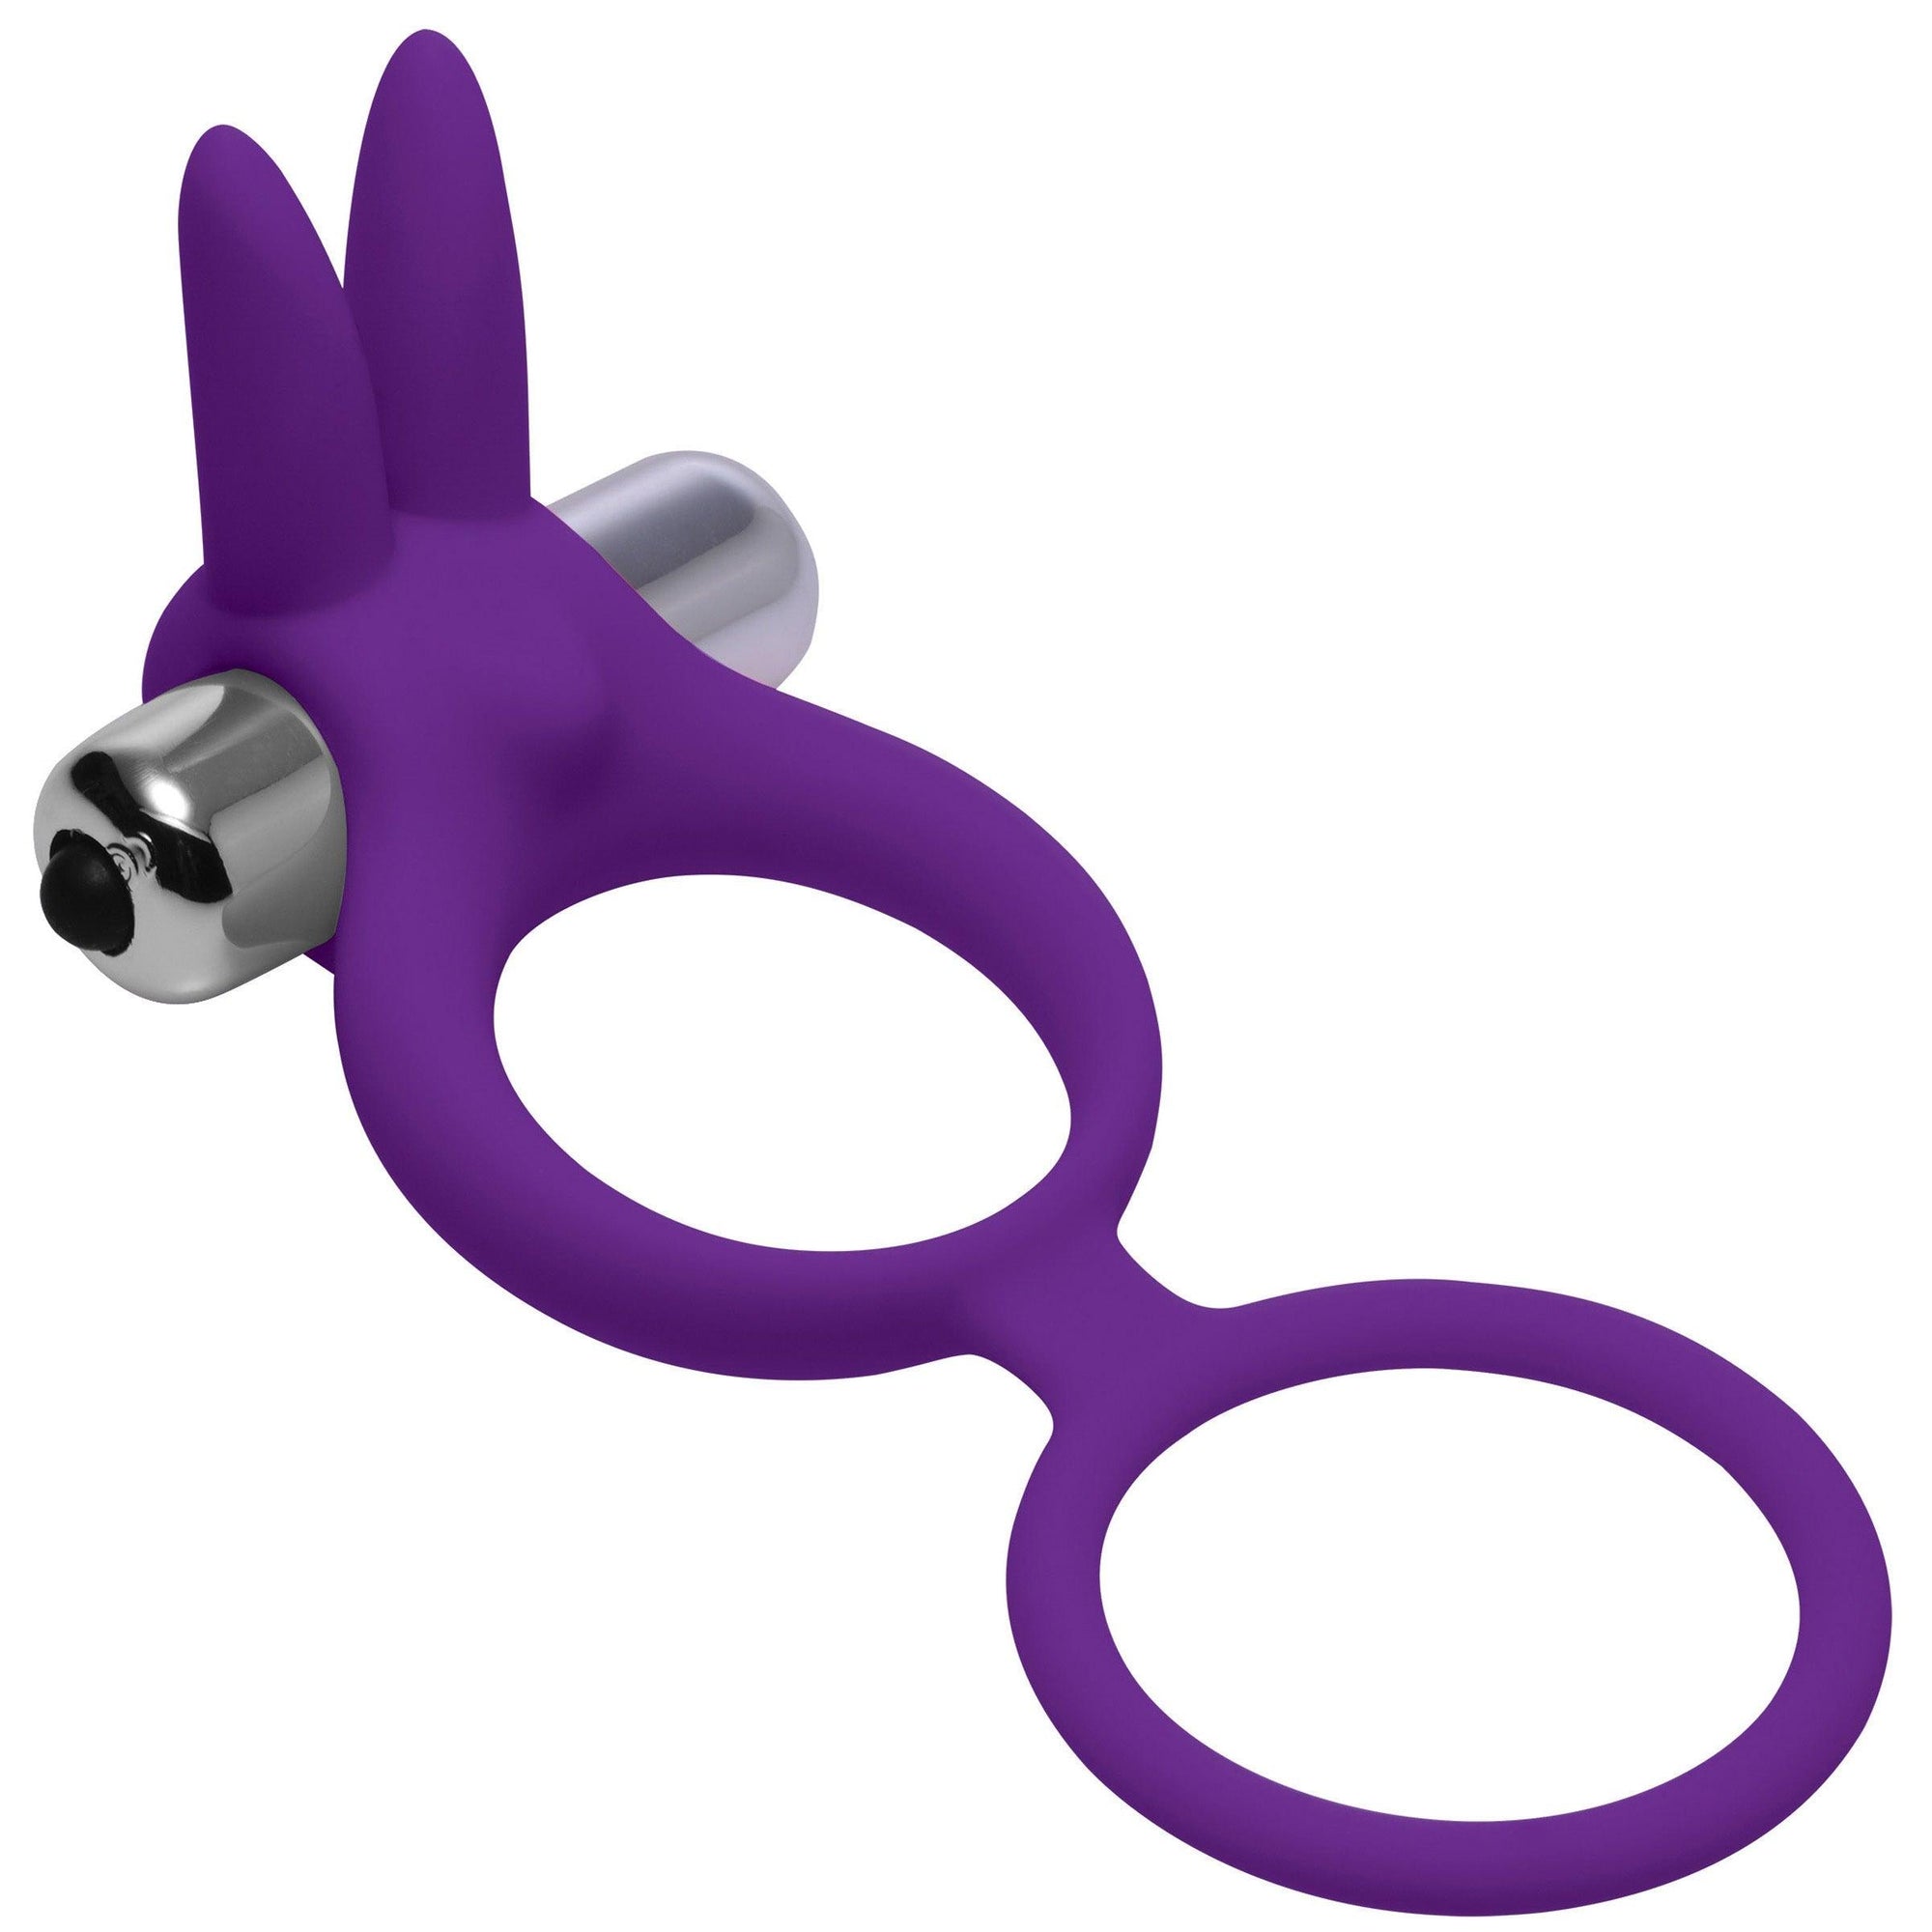 Throbbin Hopper Cock and Ball Ring with Vibrating Clit Stimulator